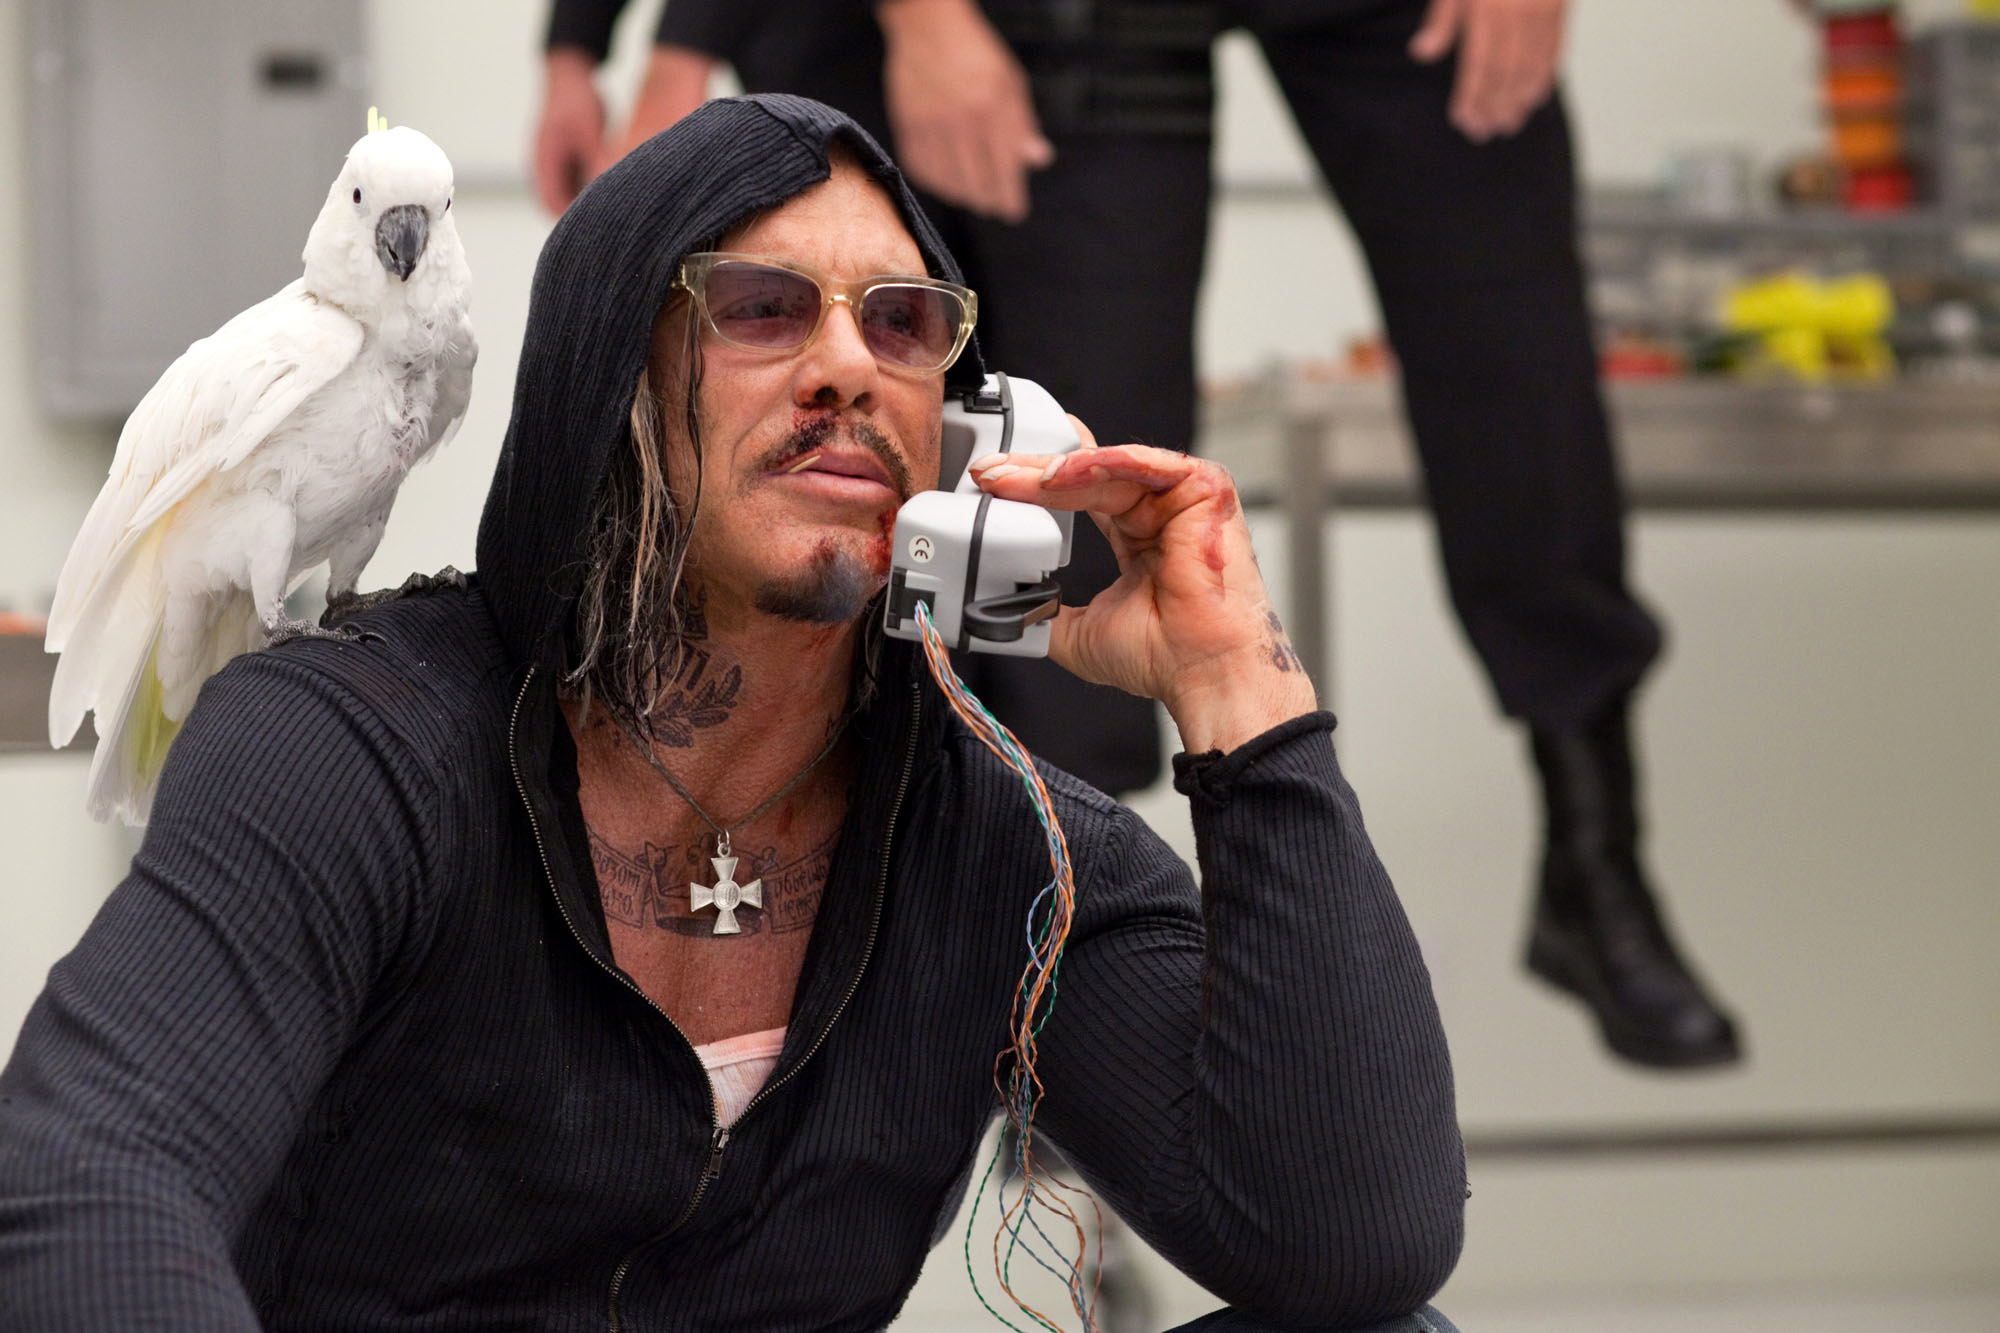 Mickey Rourke with a bird on his shoulder while talking on the phone.